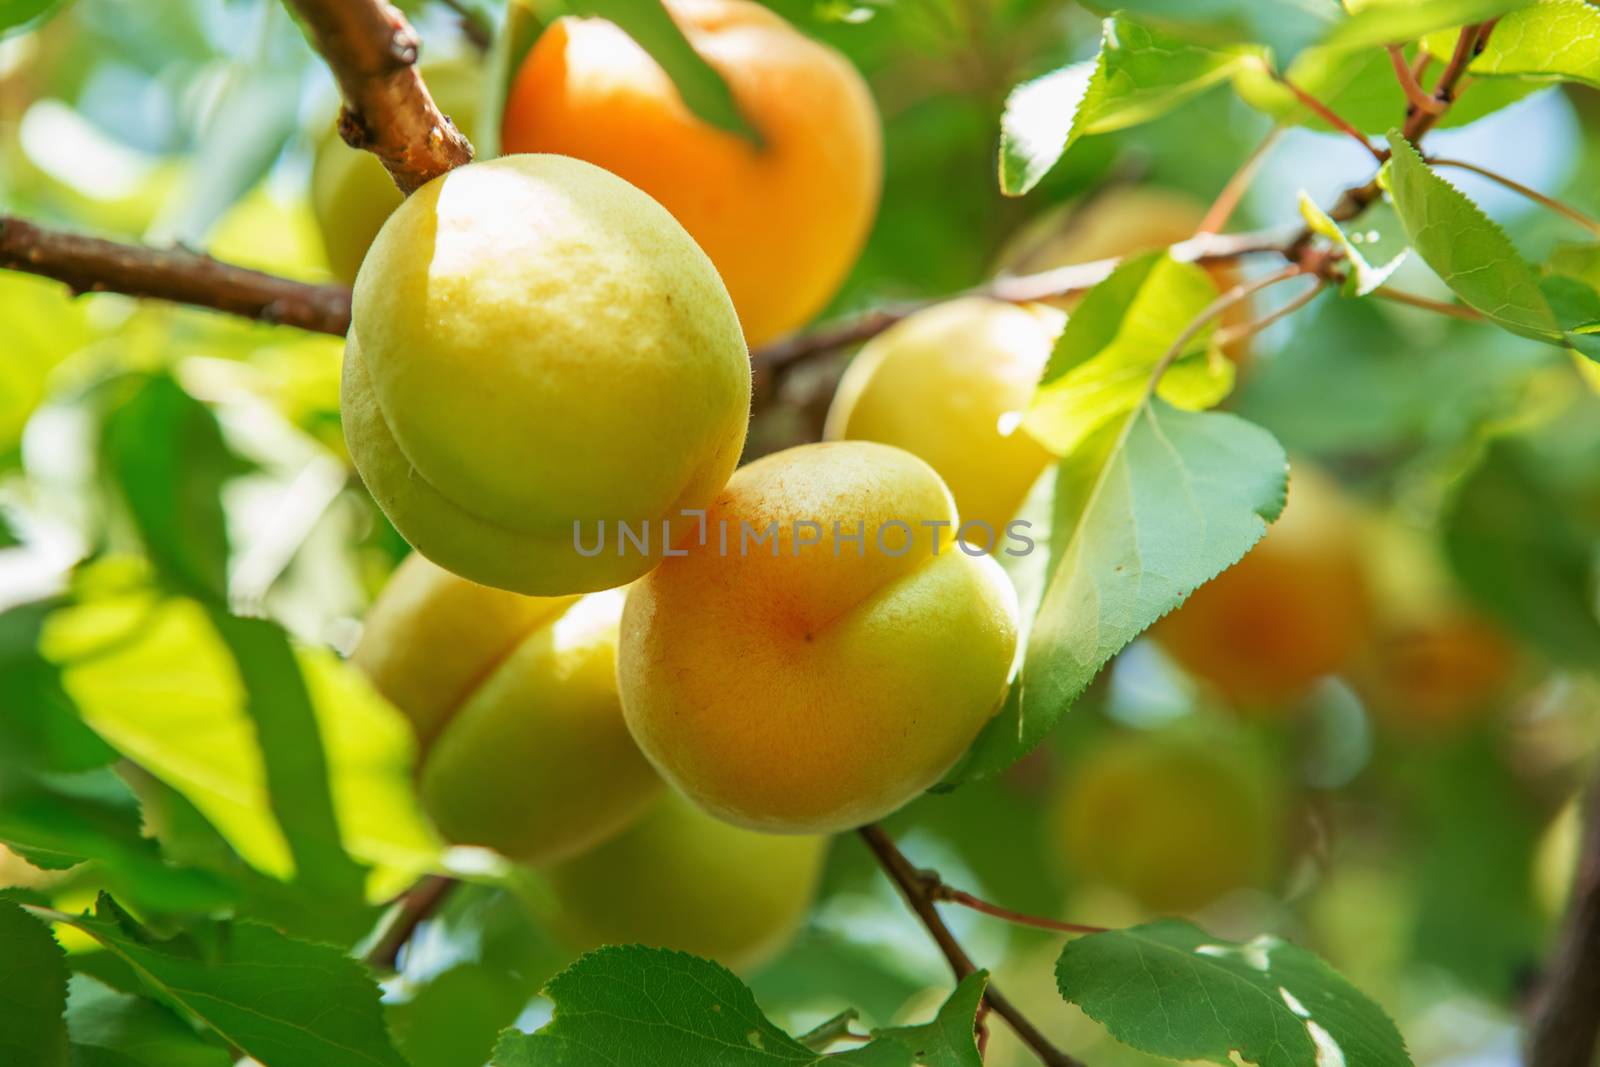 Ripe sweet apricot fruits growing on a apricot tree branch in orchard. Apricot ripening